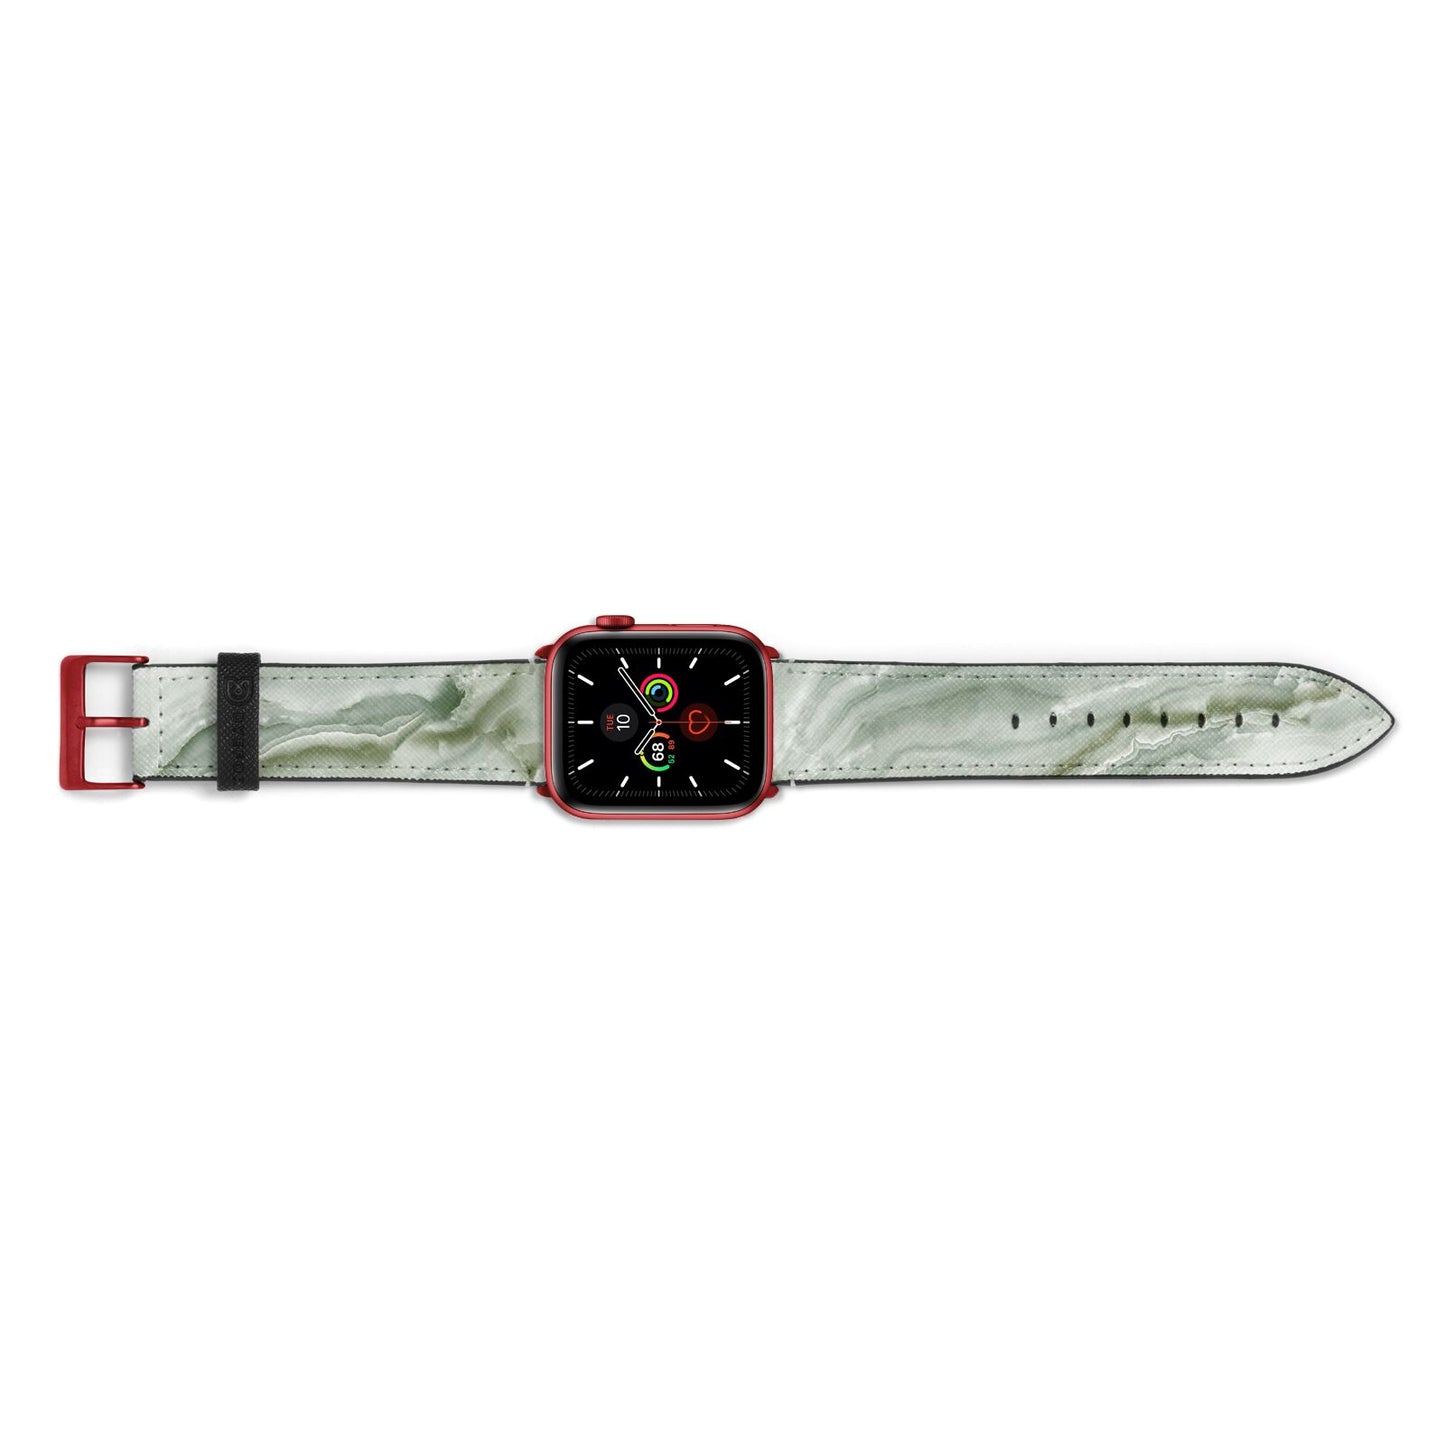 Pistachio Green Marble Apple Watch Strap Landscape Image Red Hardware